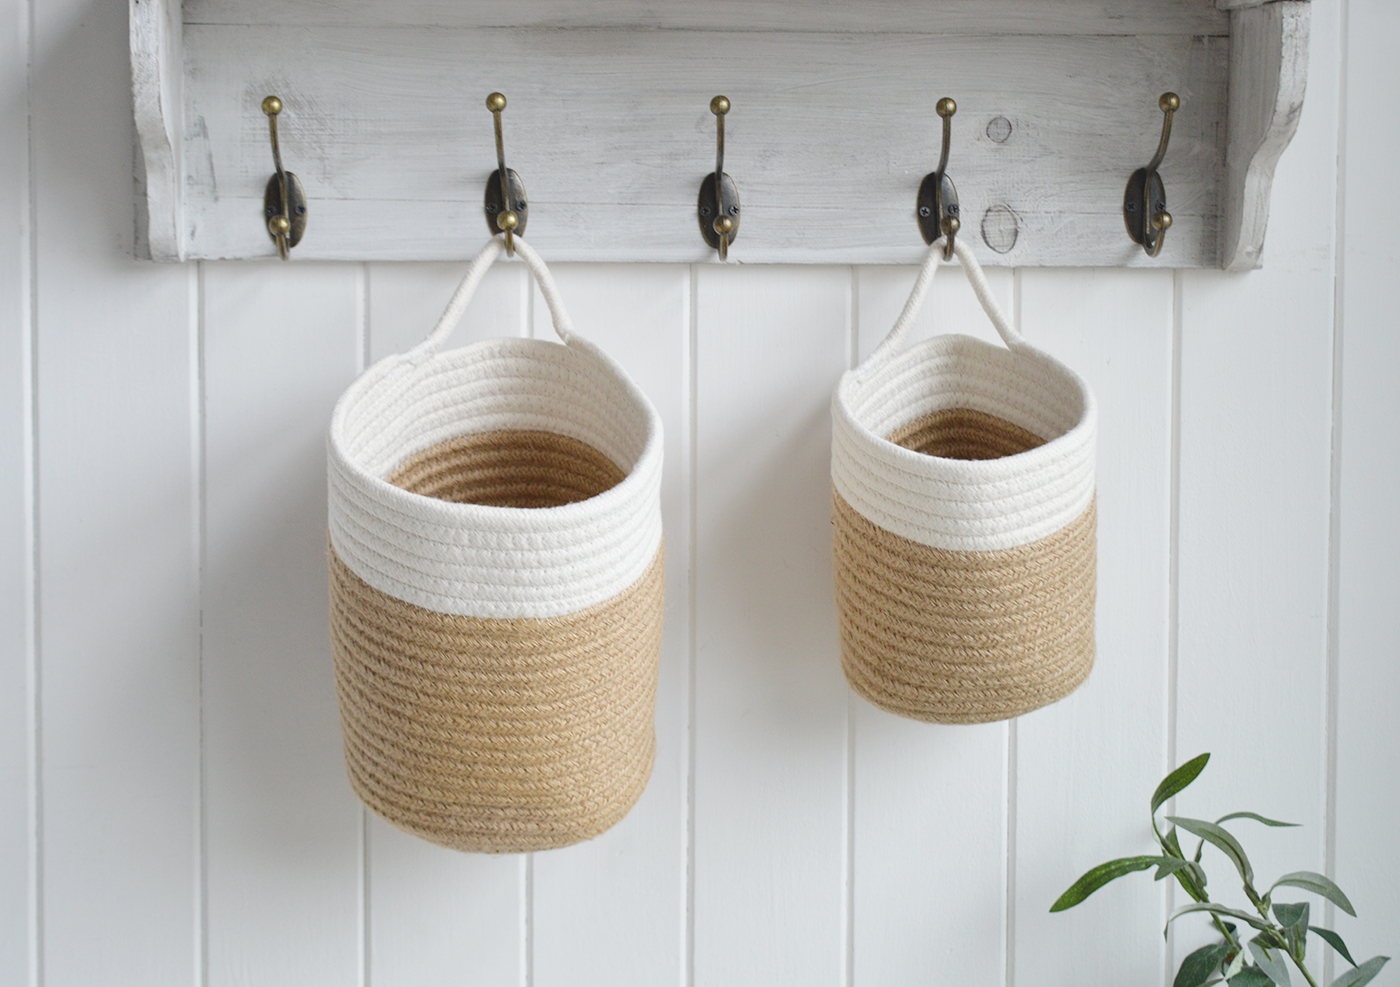 Campton set of hanging rope Baskets - New England modern country, coastal and farmhouse furniture and interiors